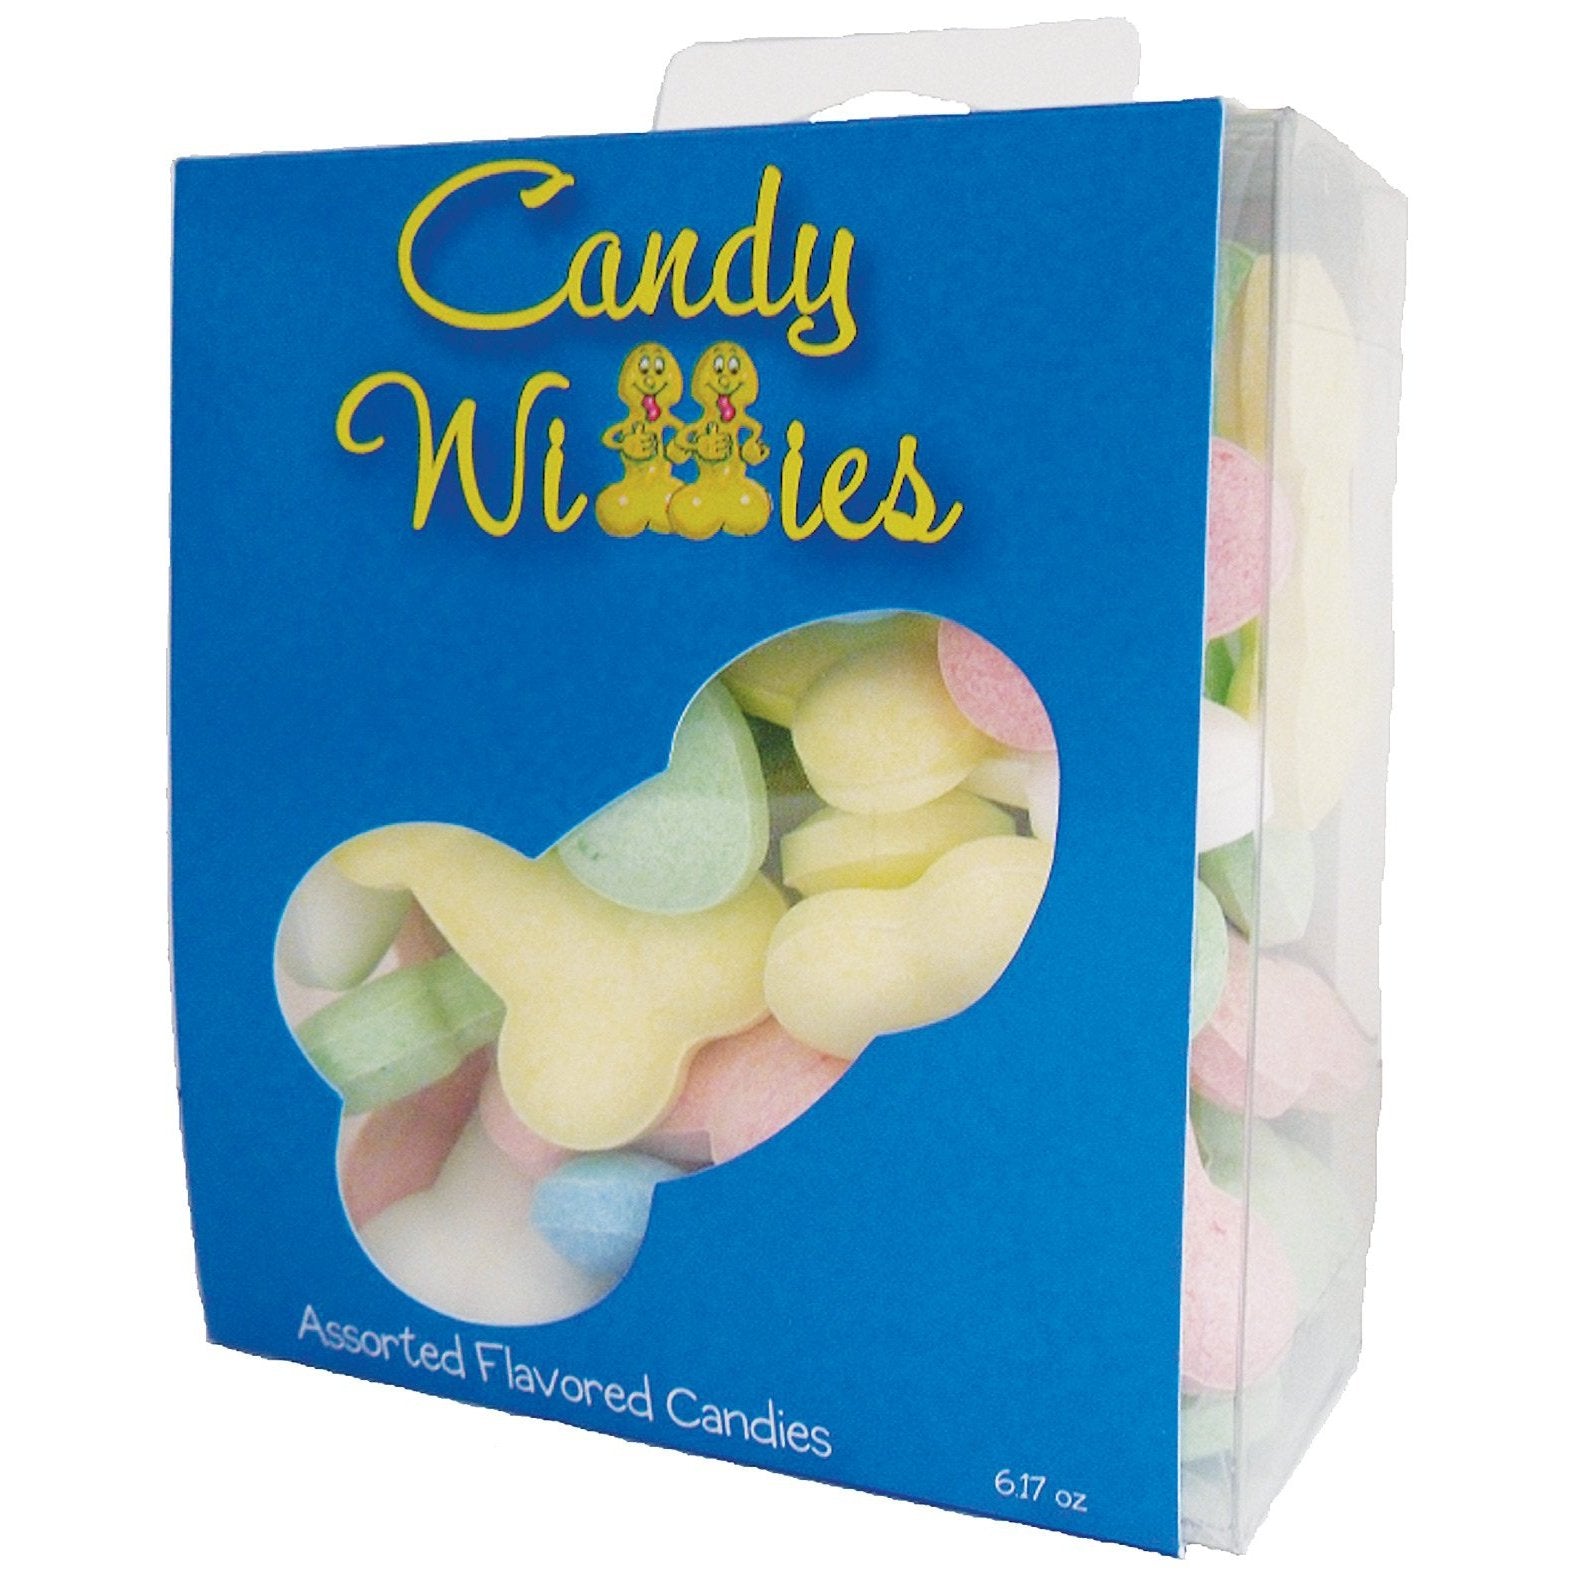 Candy Willies - 6 oz